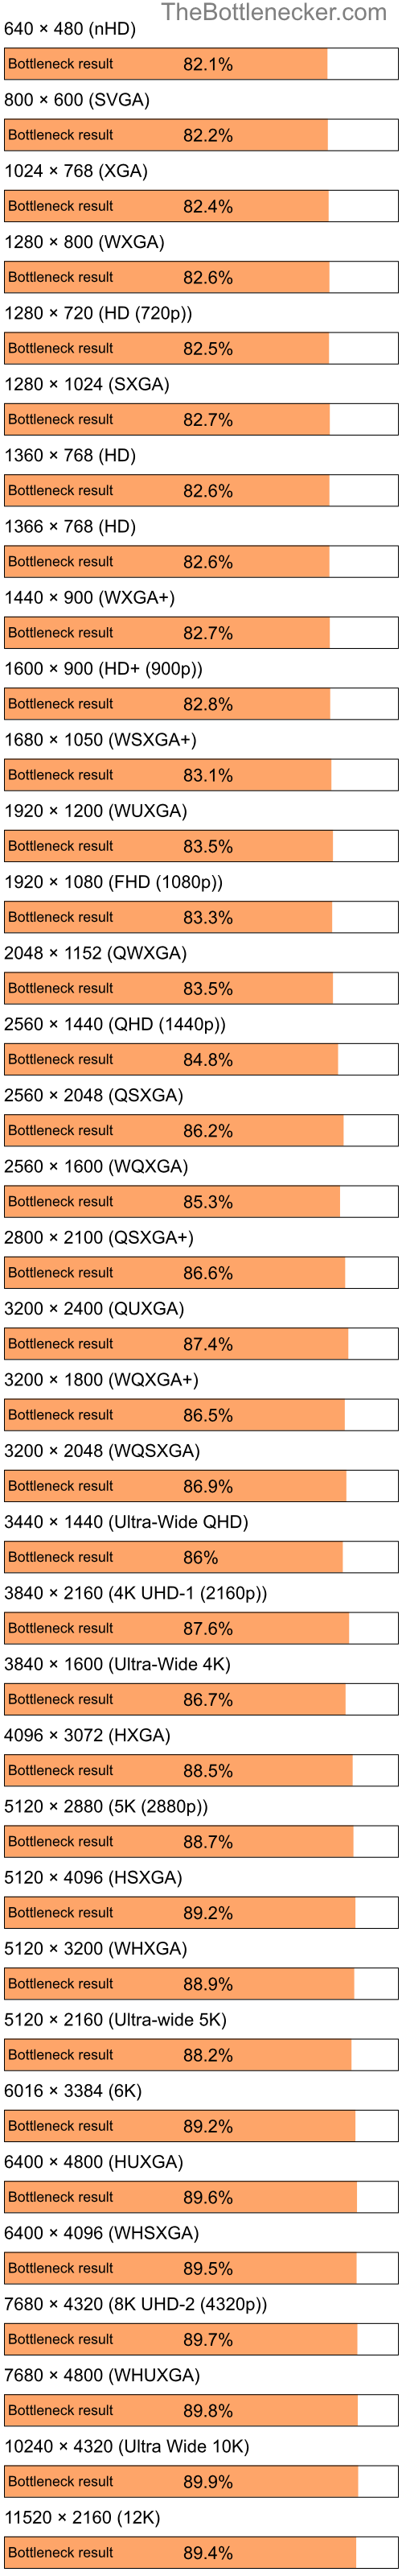 Bottleneck results by resolution for Intel Pentium 4 and AMD Mobility Radeon 9700 in Graphic Card Intense Tasks